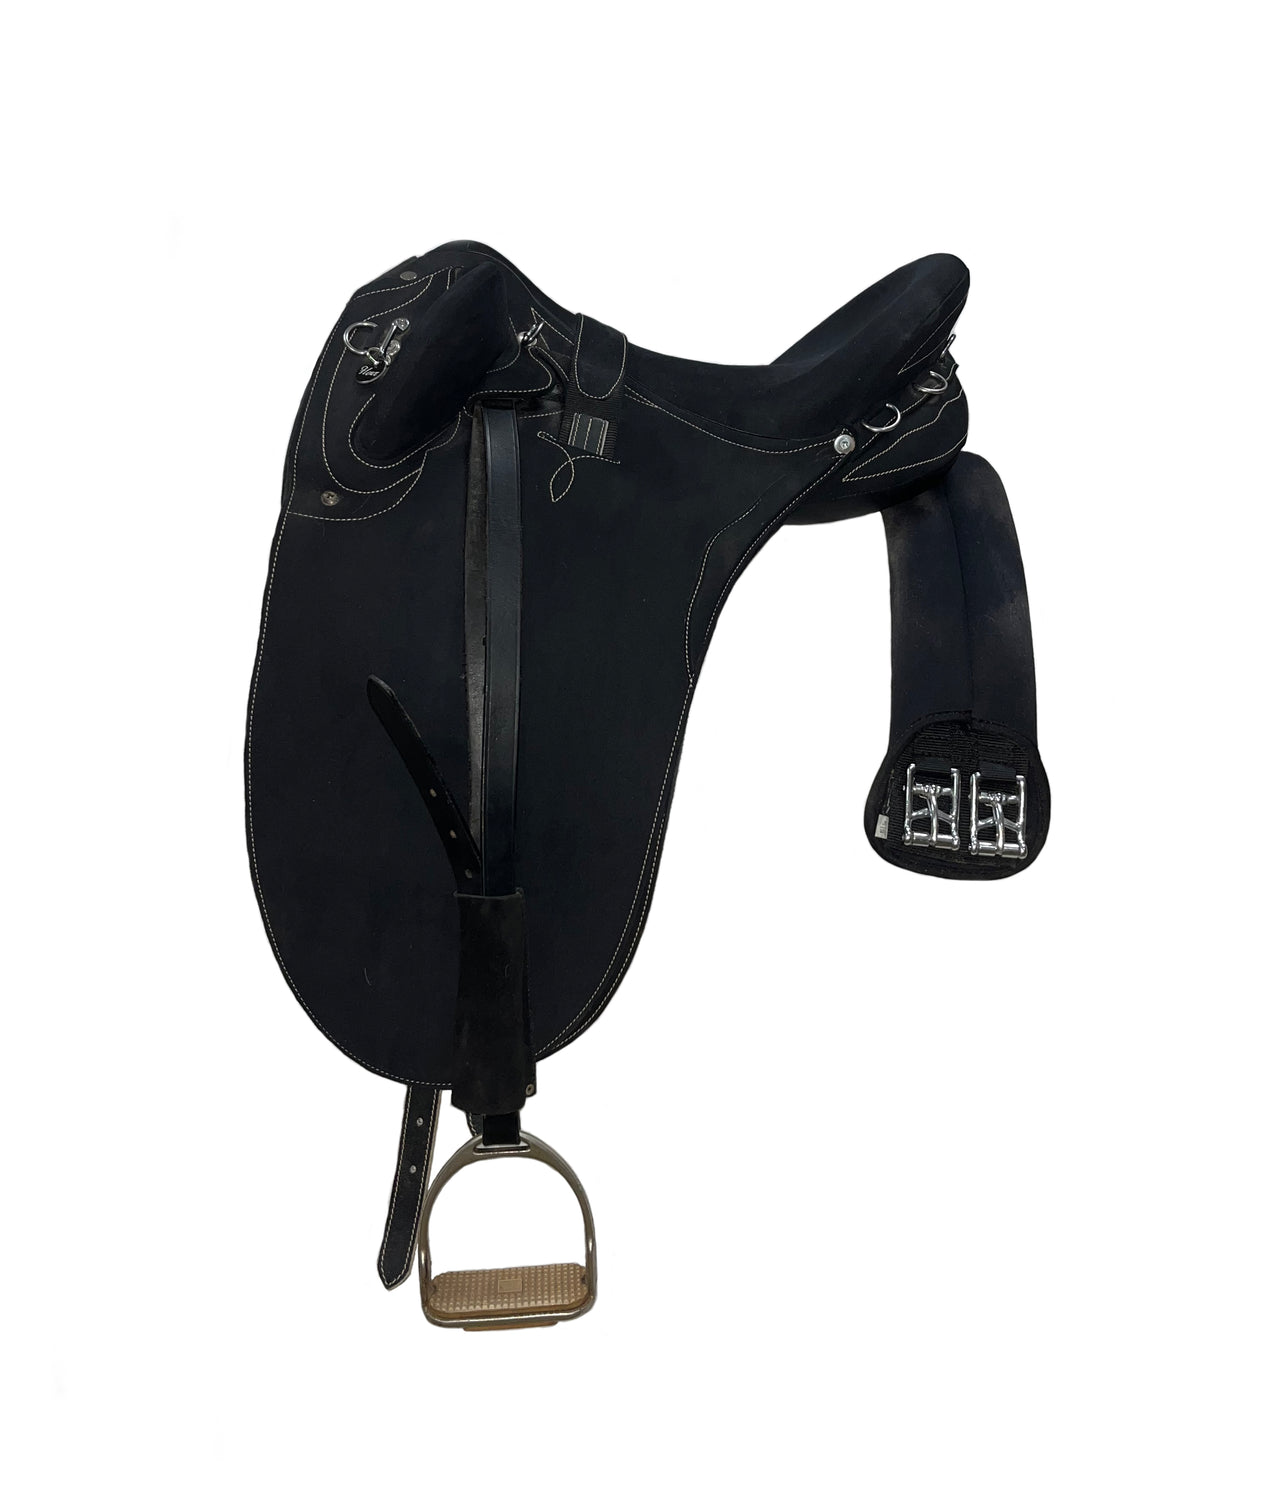 Syd Hill Stock Saddle 17 Inch Second Hand - The Trading Stables